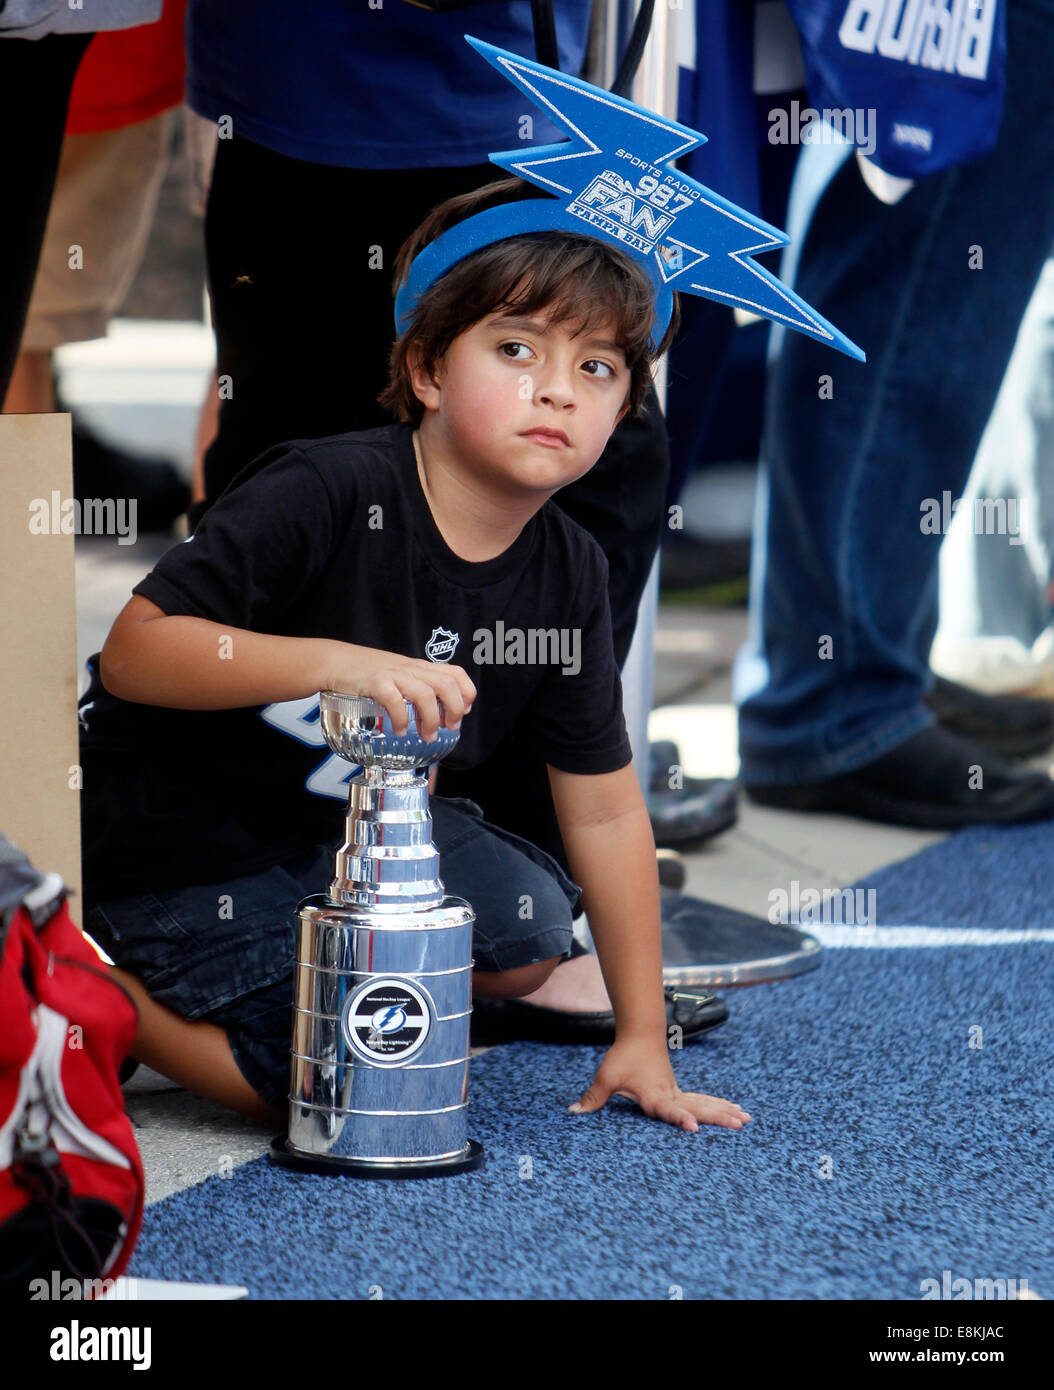 Tampa, Florida, USA. 9th October, 2014. Tampa Bay Lightning fan Lukas Kott, 5, from Tampa, clutches his miniature Stanley Cup while waiting for Lightning players to arrive on the ''blue carpet'' before taking on the Florida Panthers on opening night at the Times Forum in Tampa Thursday evening (10/6/14). HIs favorite player is Steven Stamkos, his older sister Brittanty Kott said. ''He's obsessed, he wants to be like him. © ZUMA Press, Inc/Alamy Live News © ZUMA Press, Inc/Alamy Live News Stock Photo